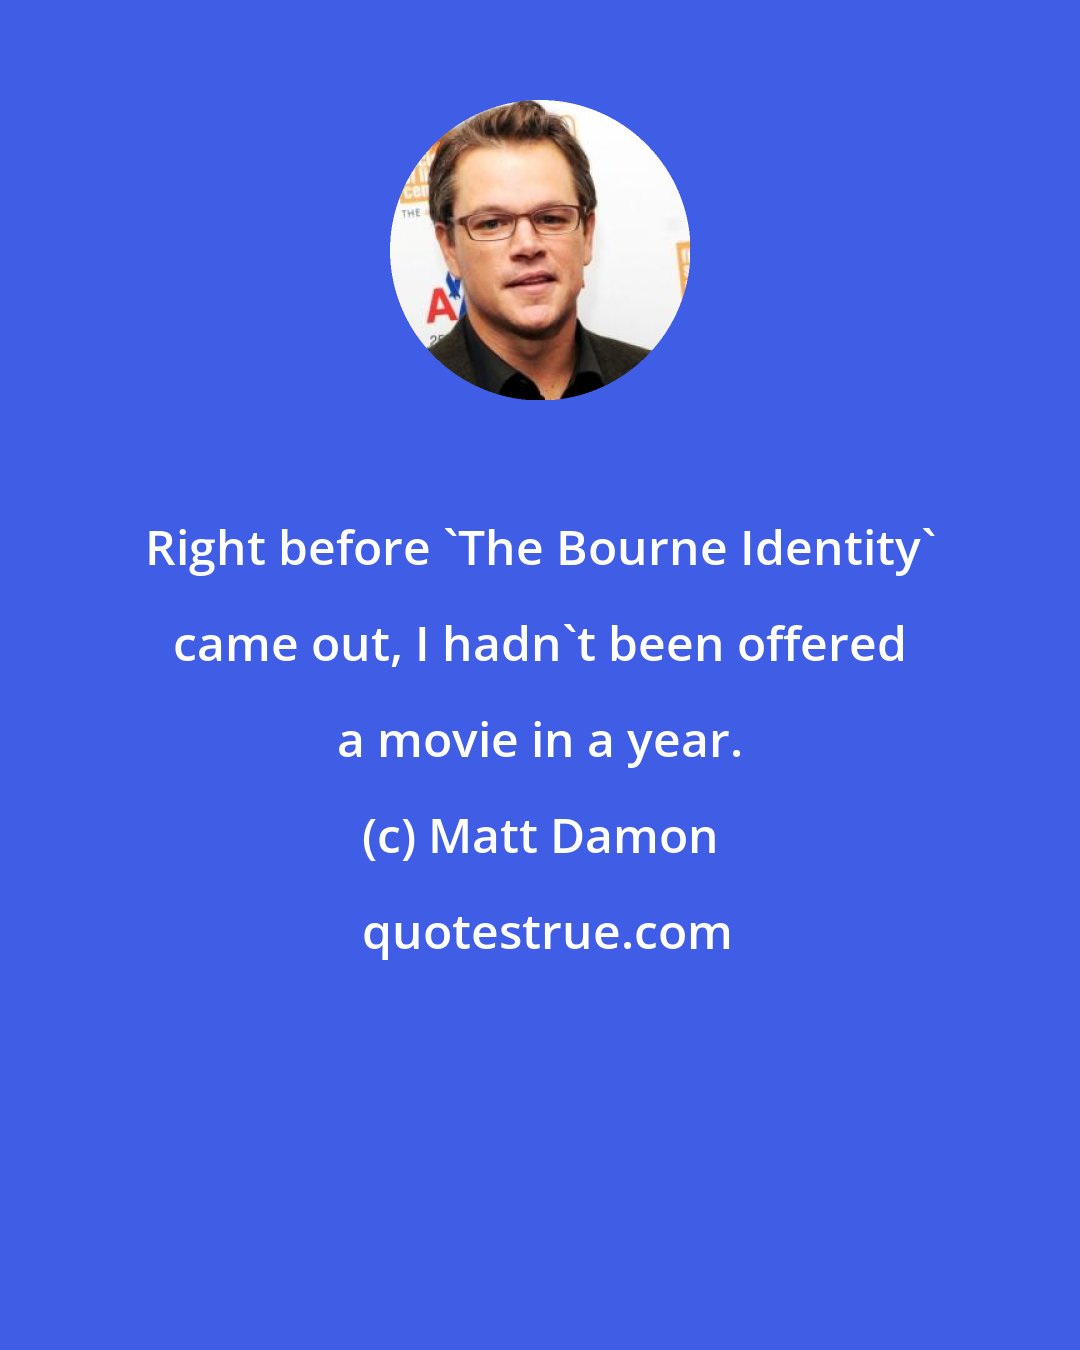 Matt Damon: Right before 'The Bourne Identity' came out, I hadn't been offered a movie in a year.